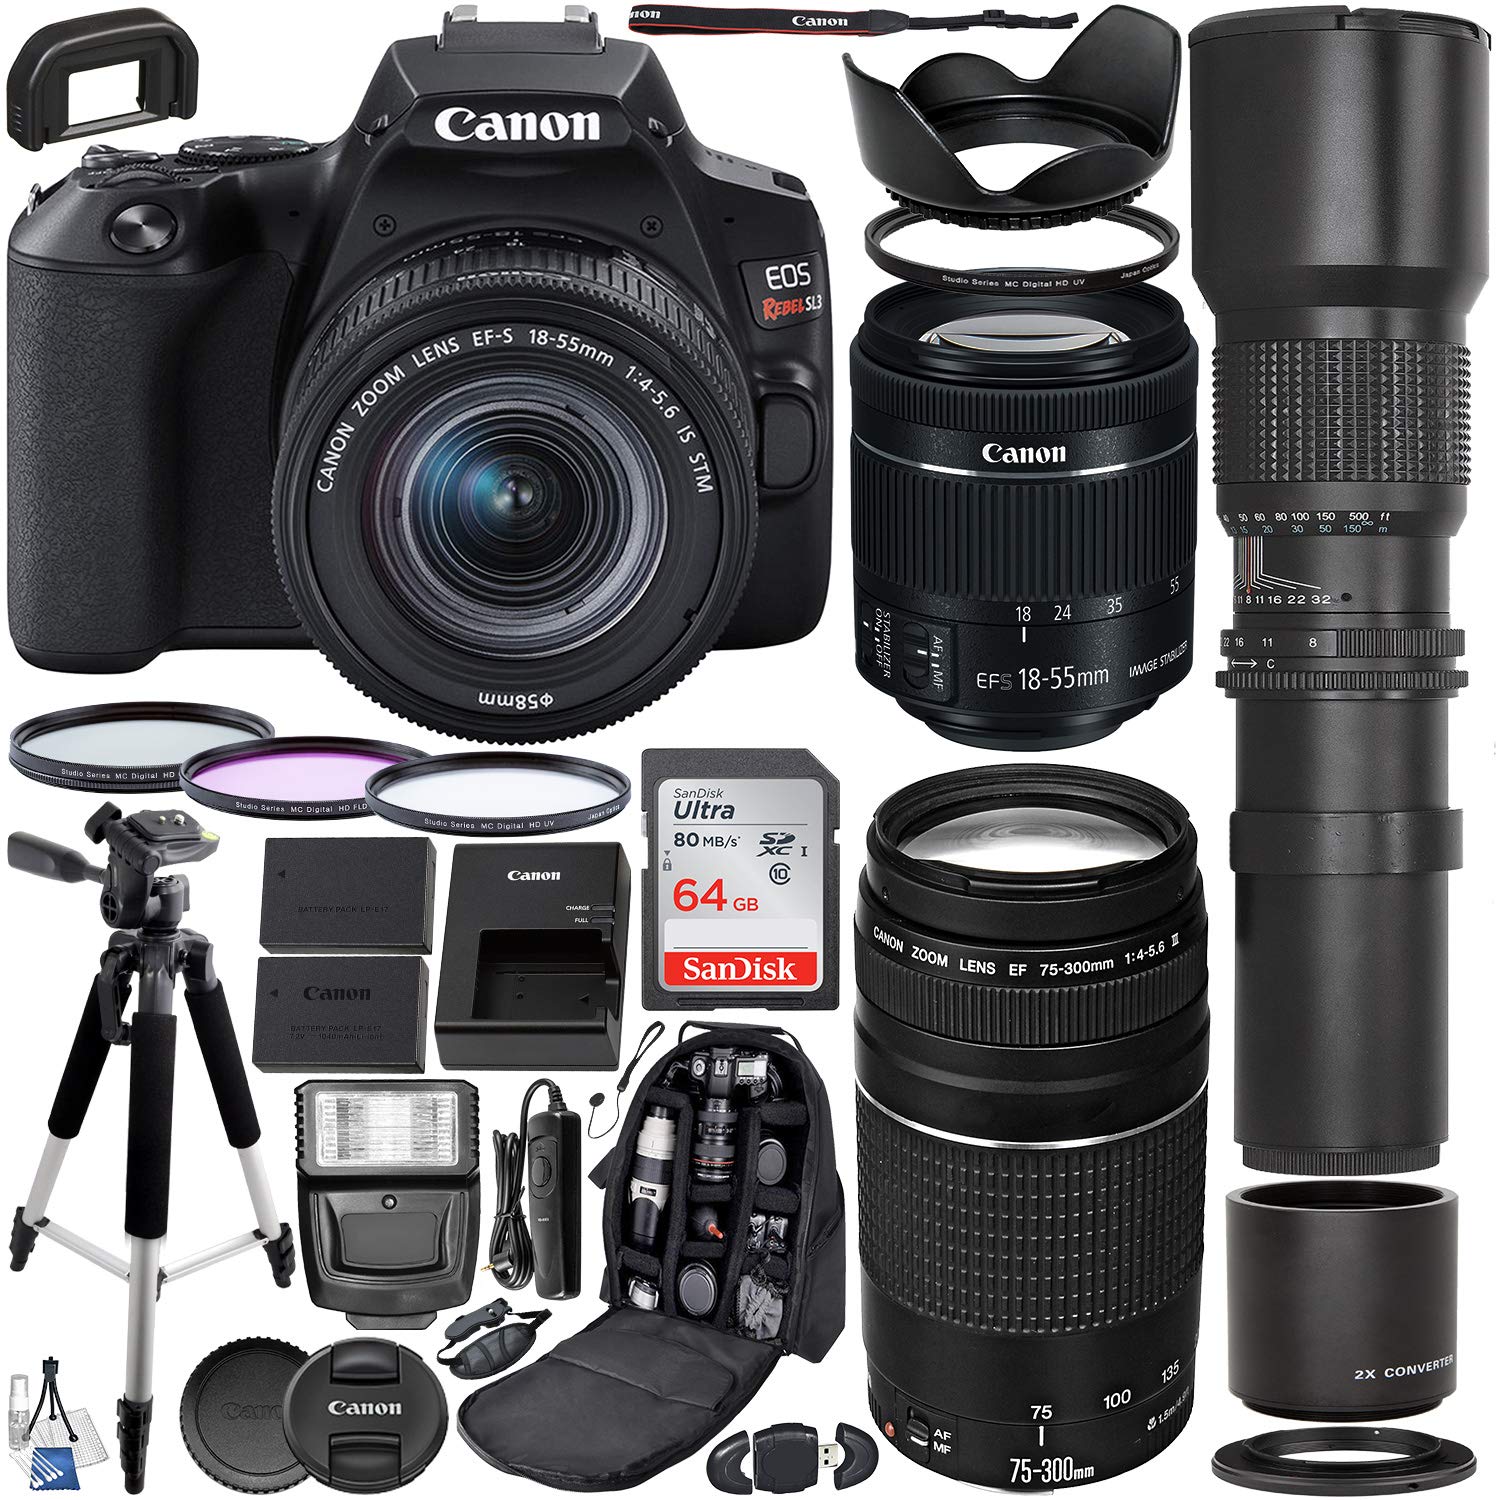 Canon EOS Rebel SL3 DSLR Camera with 18-55mm Lens - 3453C002 and 75-300mm Lens - 6472A002 and Accessory Bundle